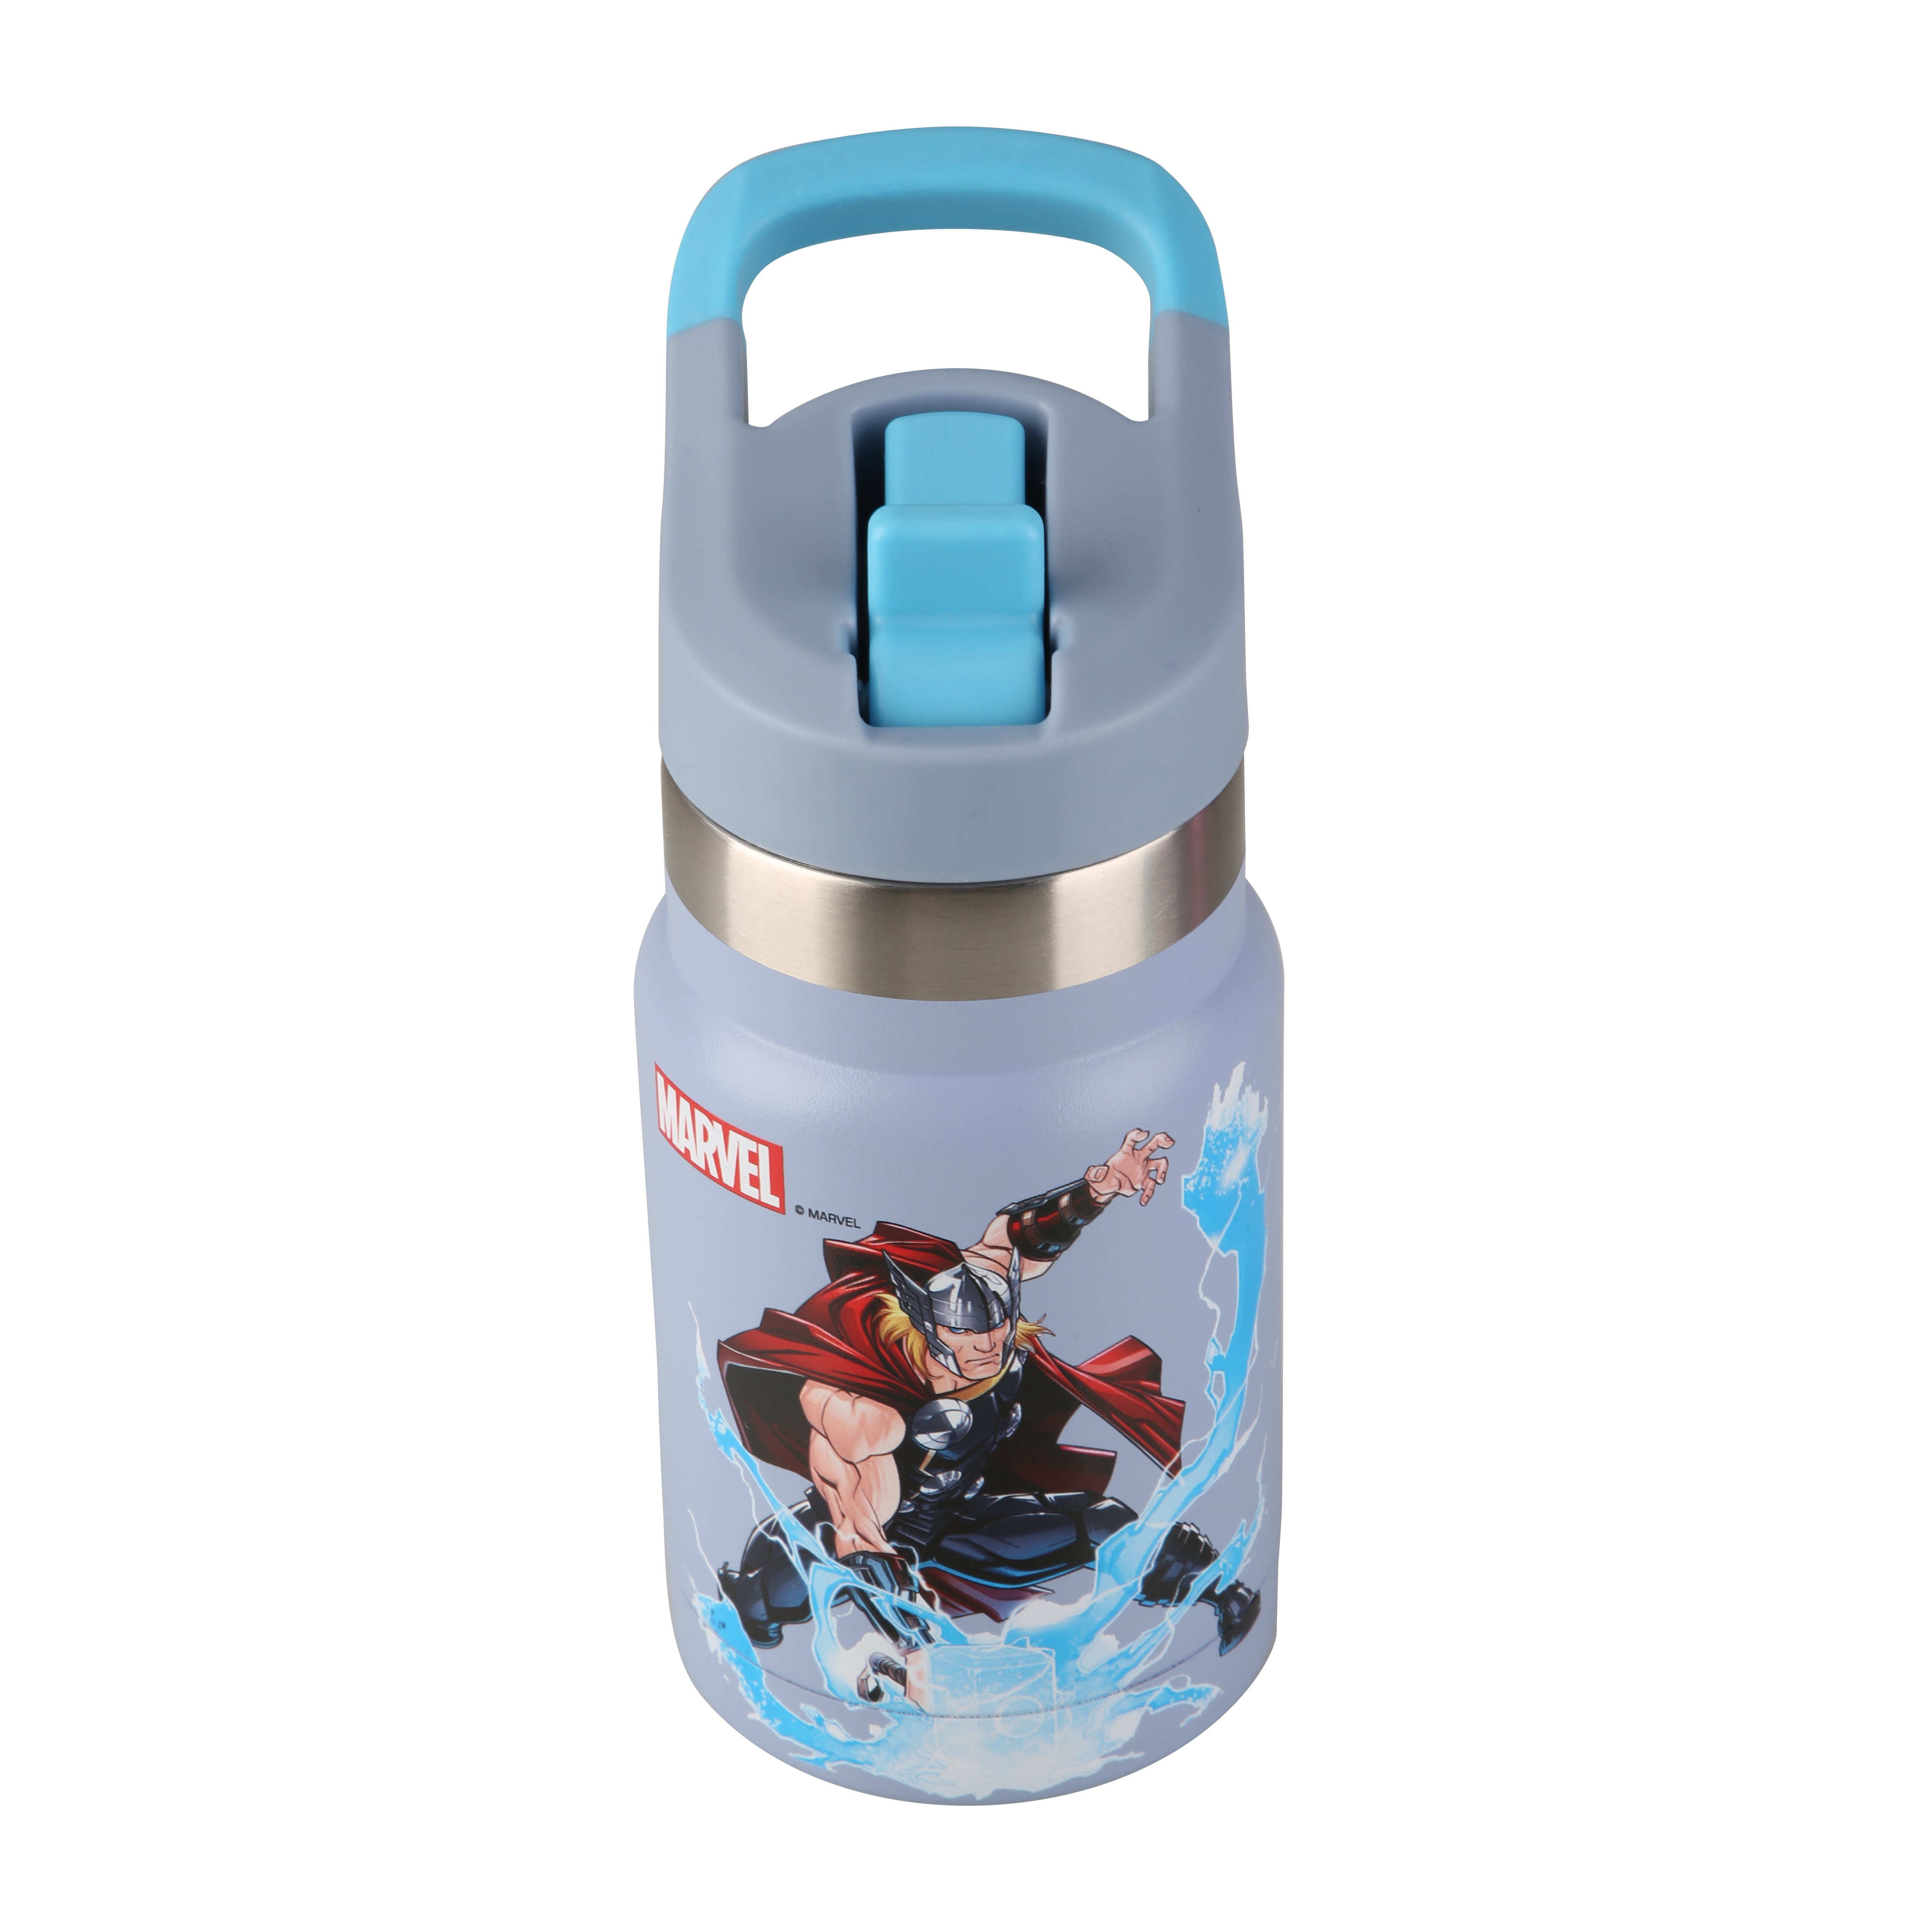 Disney Collection Spiderman Amazing Dad 17 Oz Stainless Steel Bottle,  Color: Silver - JCPenney